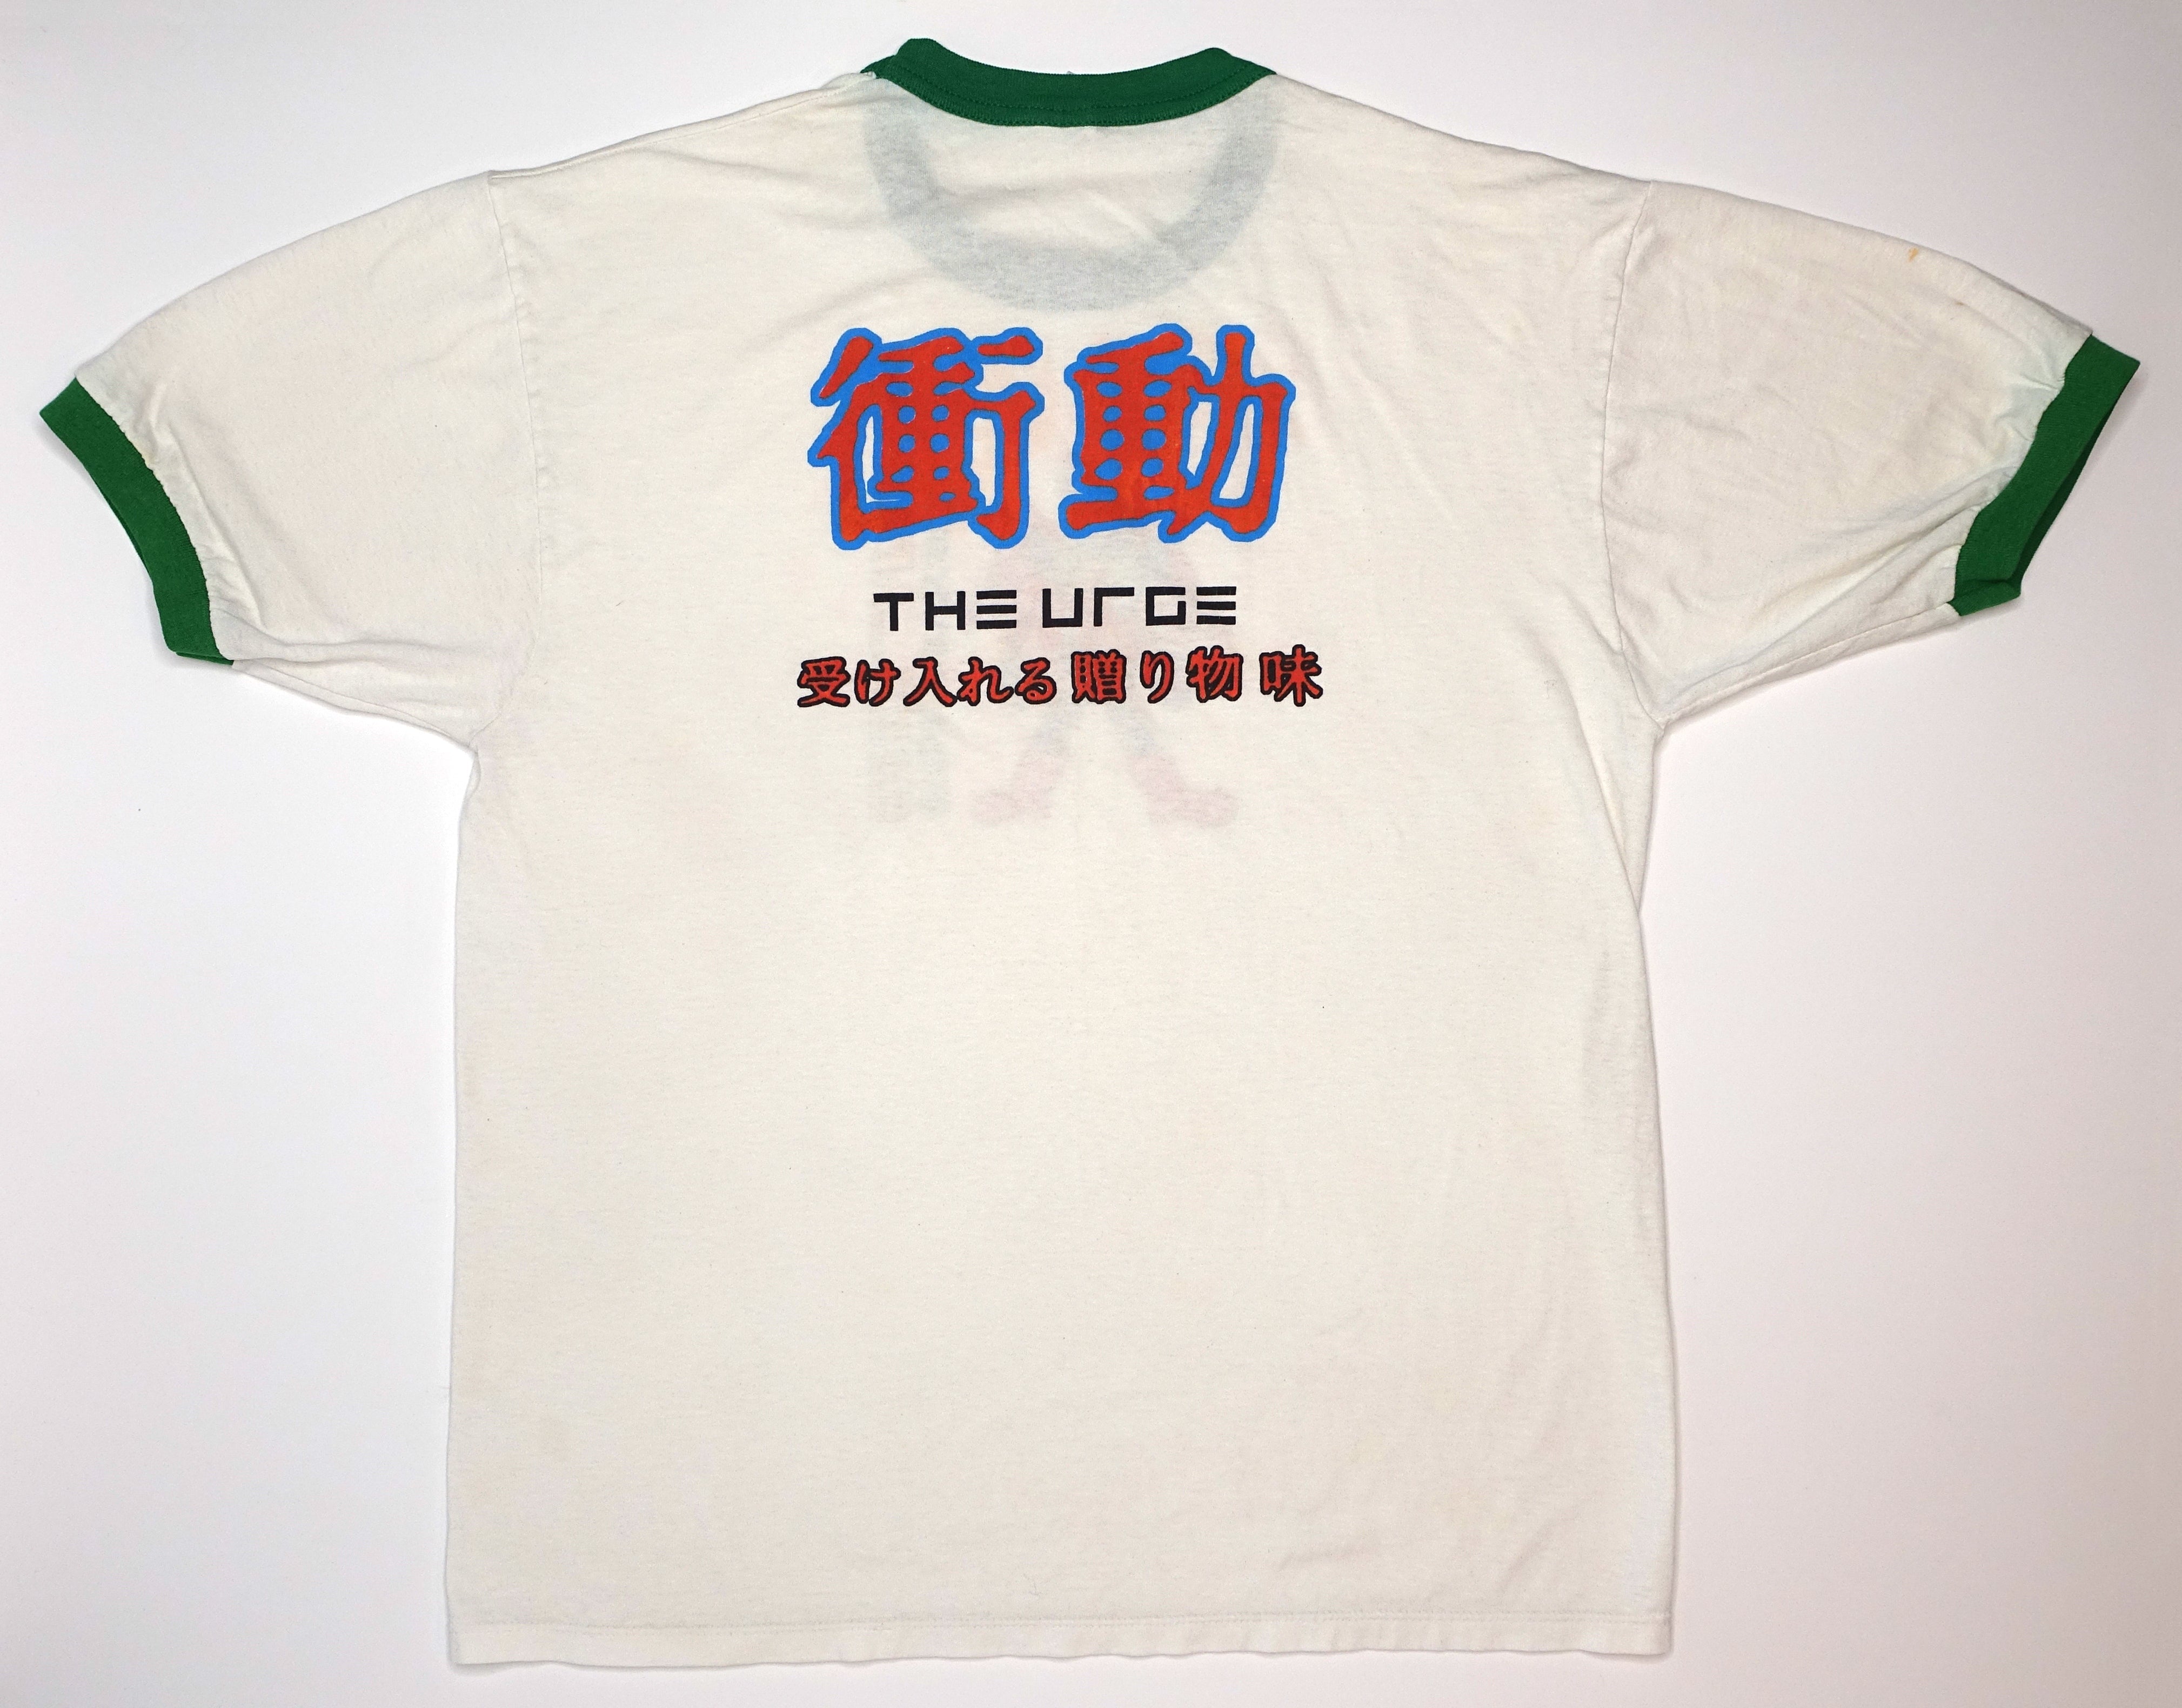 The Urge – Impulse / Receiving The Gift Of Flavor 1995 Tour Shirt Size XL